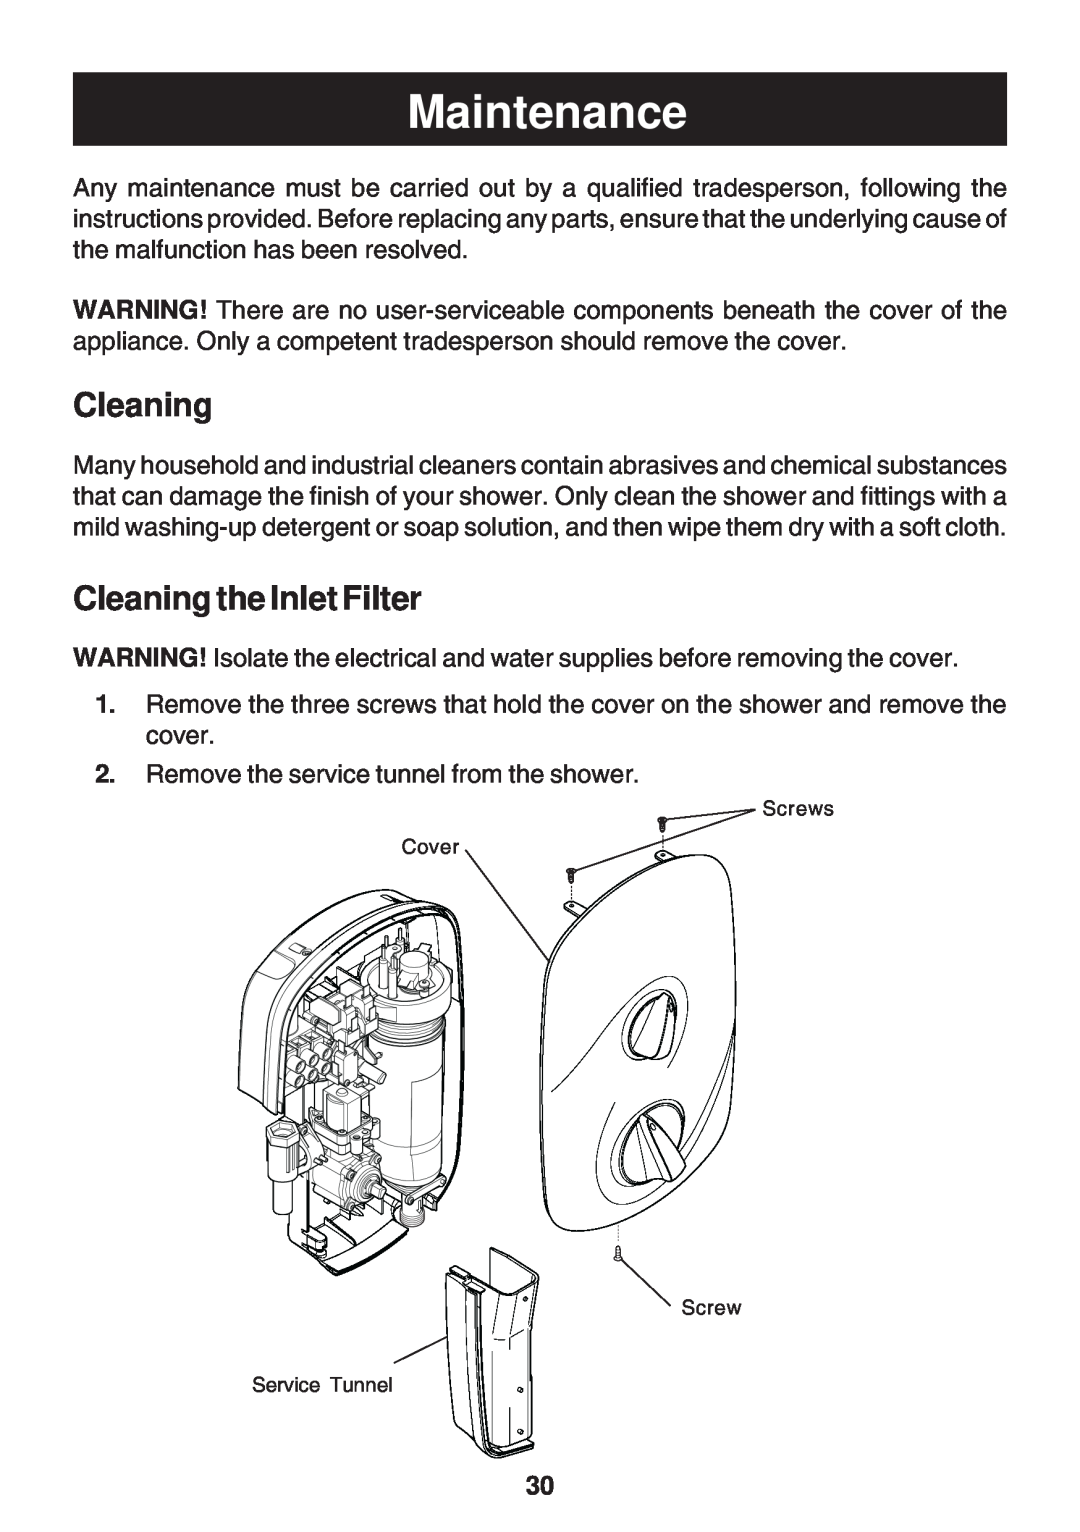 Kohler Electric Shower manual Maintenance, Cleaning the Inlet Filter 